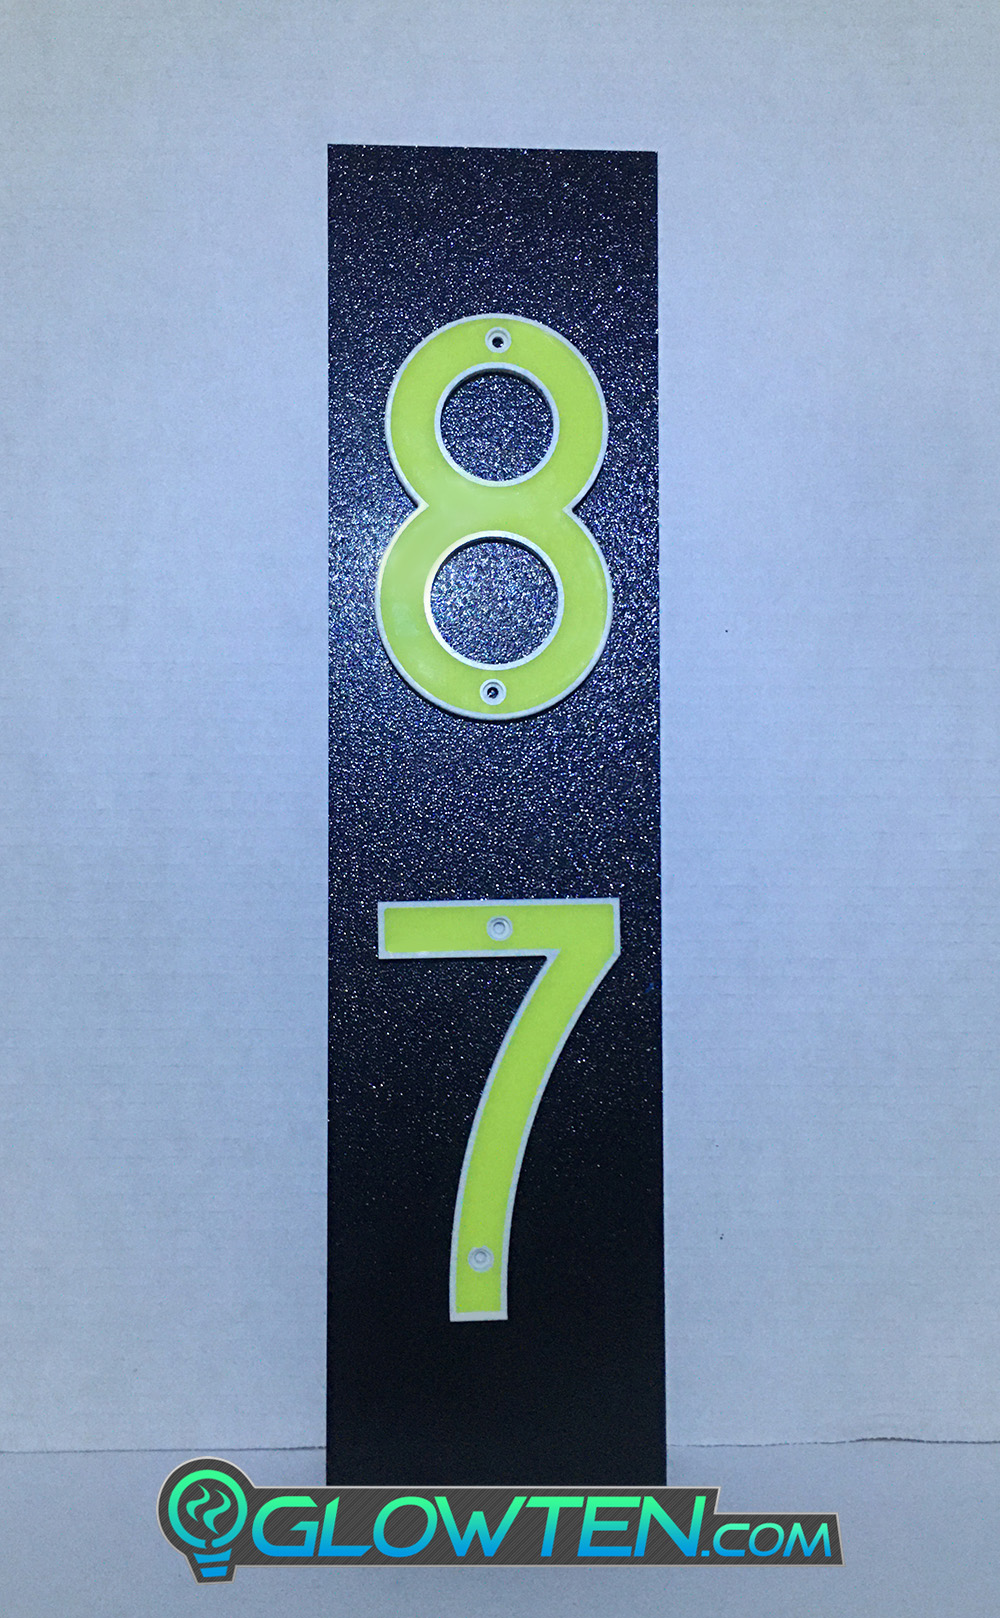 GLOWTEN.com - Fully Customizable Please Pick And Choose Your Numbers, Absorbs Photons From Any Light Source And Then This Stored Energy Is Released In The Dark TWO 2 NUMBERS with BLACK PLAQUE BACKING Glow In Dark House Address Number Vertical Eco Friendly Photoluminescent Sign ABS Material Price For Whole Set ABS Plastic Photoluminescent Pigment picture photo cap preview pic image search 1